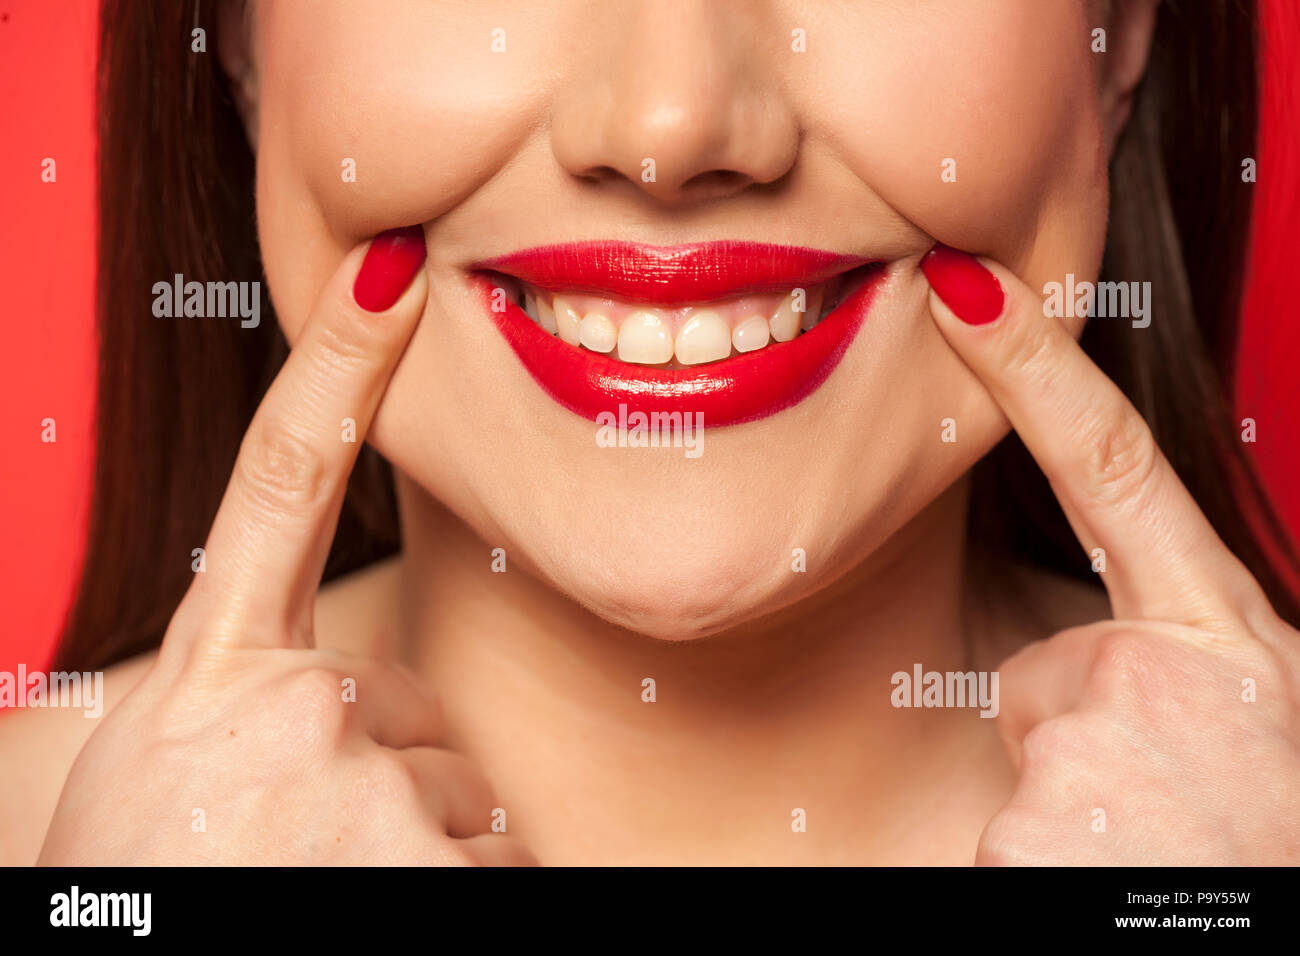 woman forced her smile with her fingers Stock Photo